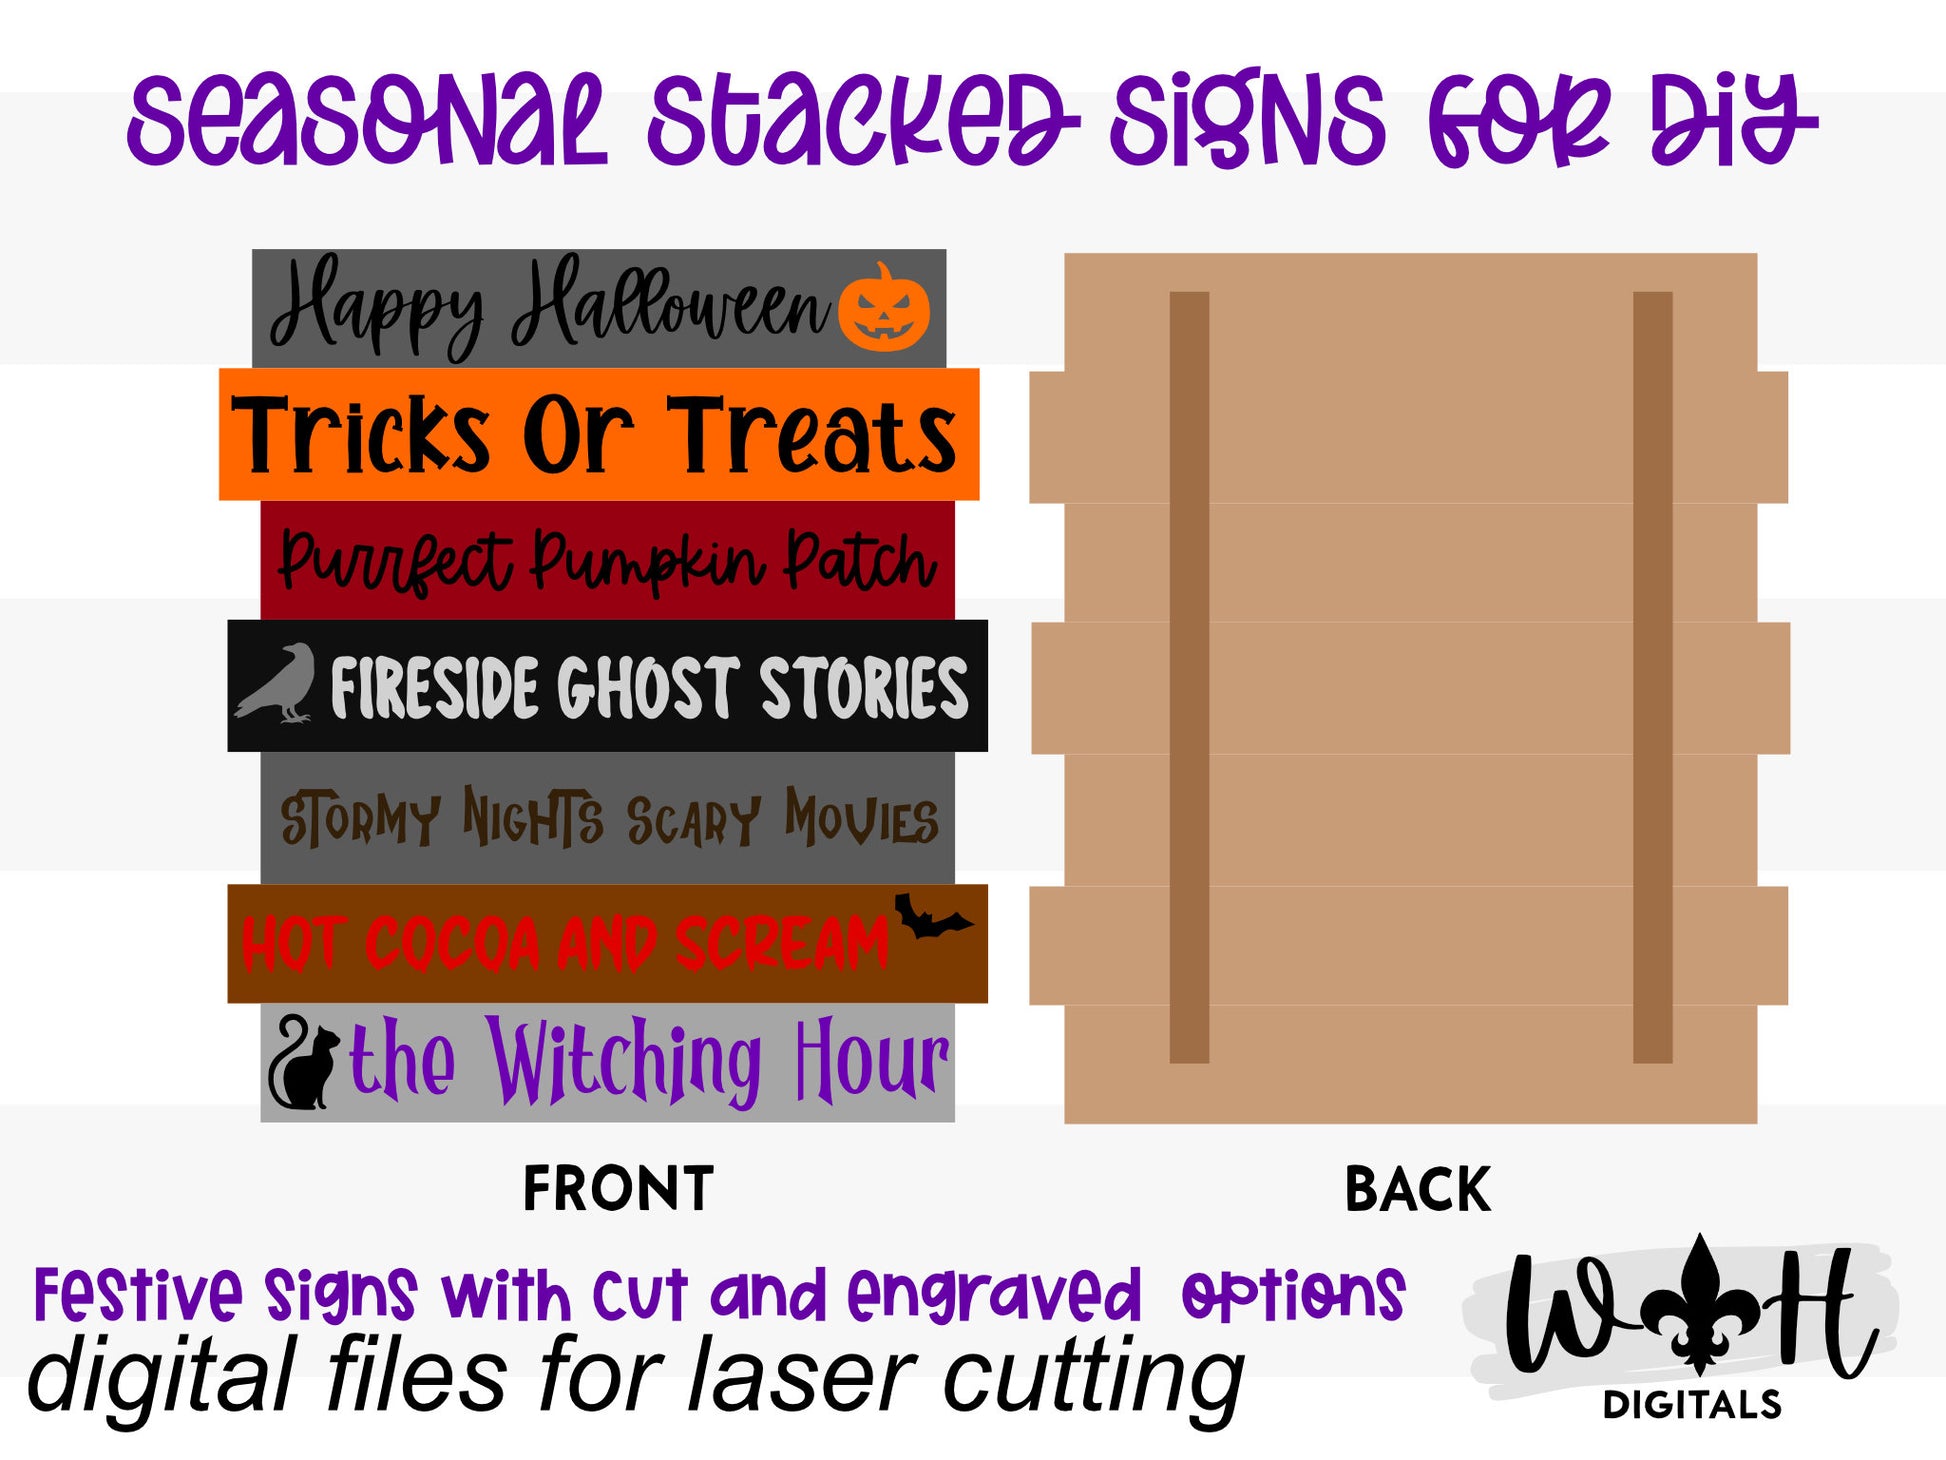 Happy All Hallows Eve Bucket List Stacked Sign Bundle - Seasonal Wall Decor and DIY Kits - Cut File For Glowforge Lasers - Digital SVG File